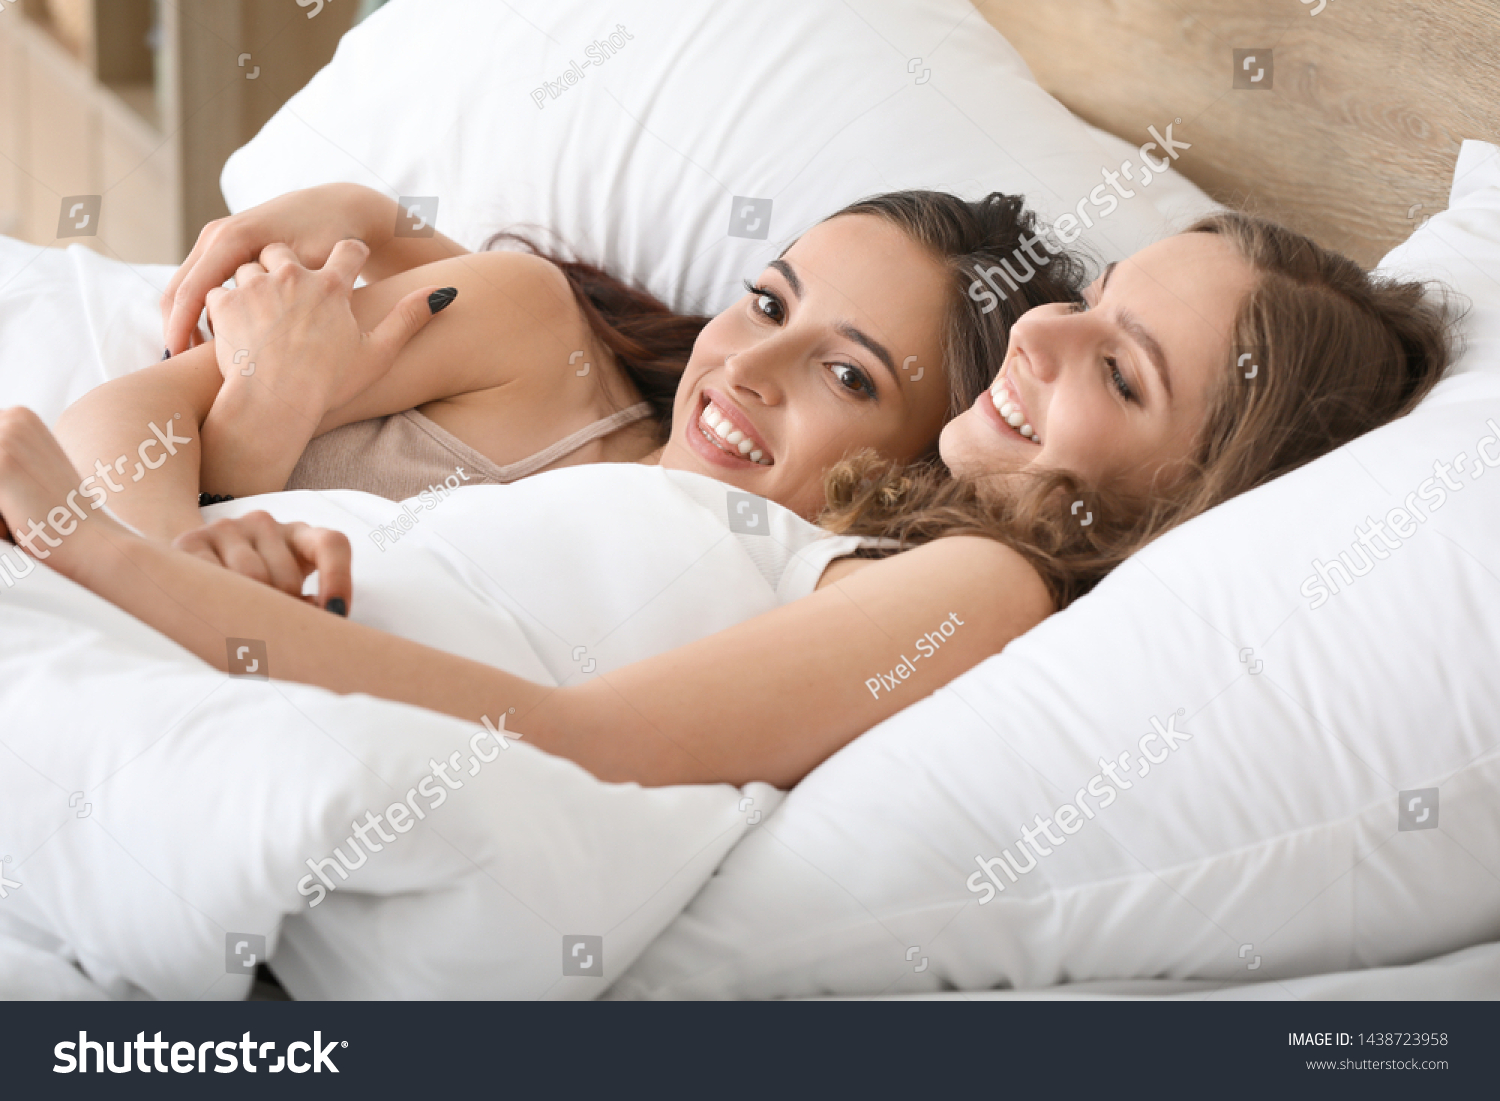 amy bonett recommends Lesbians In Bed Together